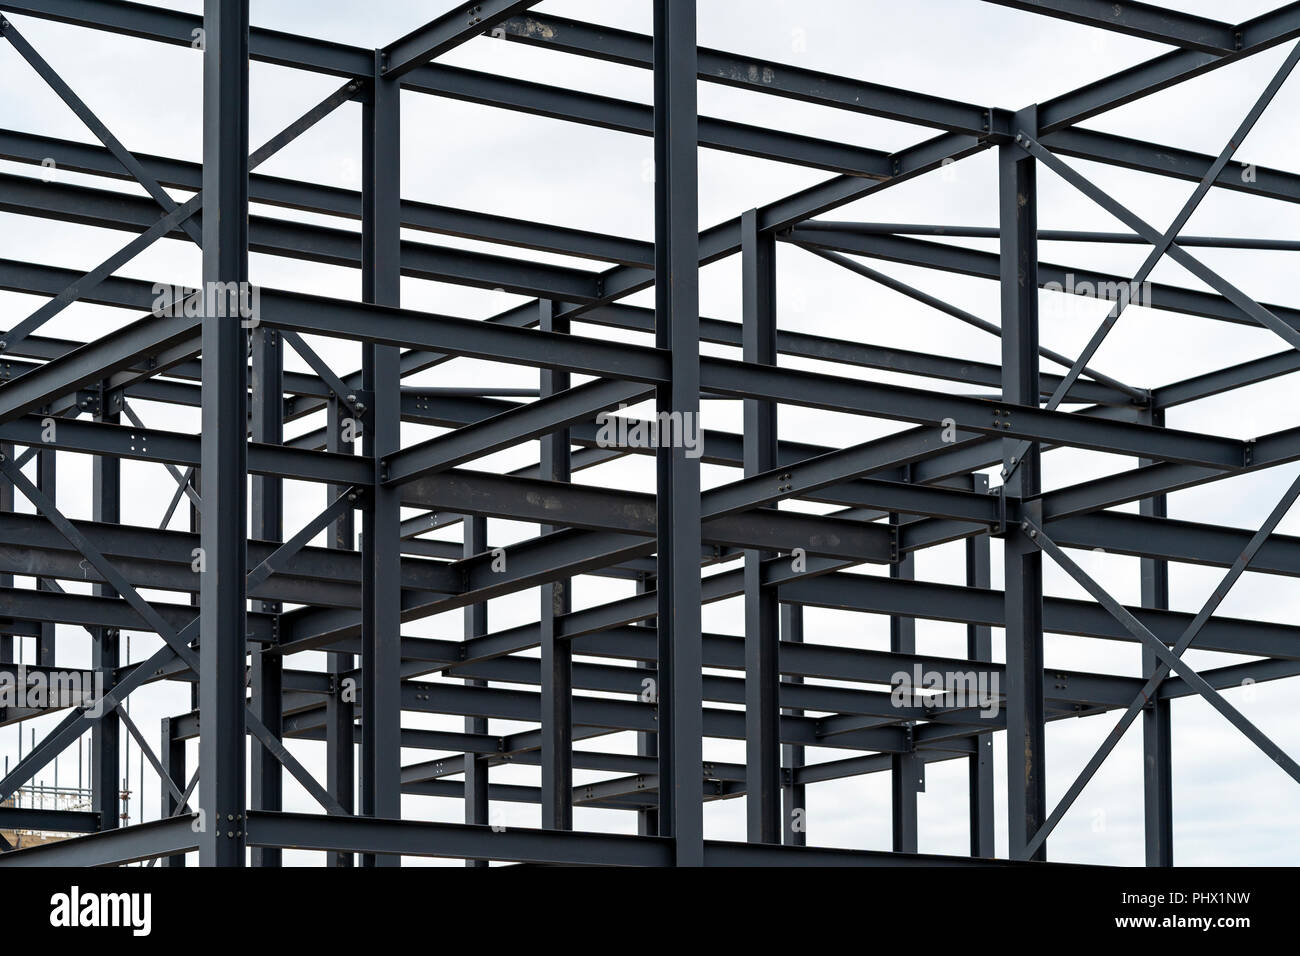 Abstract picture of steelwork against white sky Stock Photo